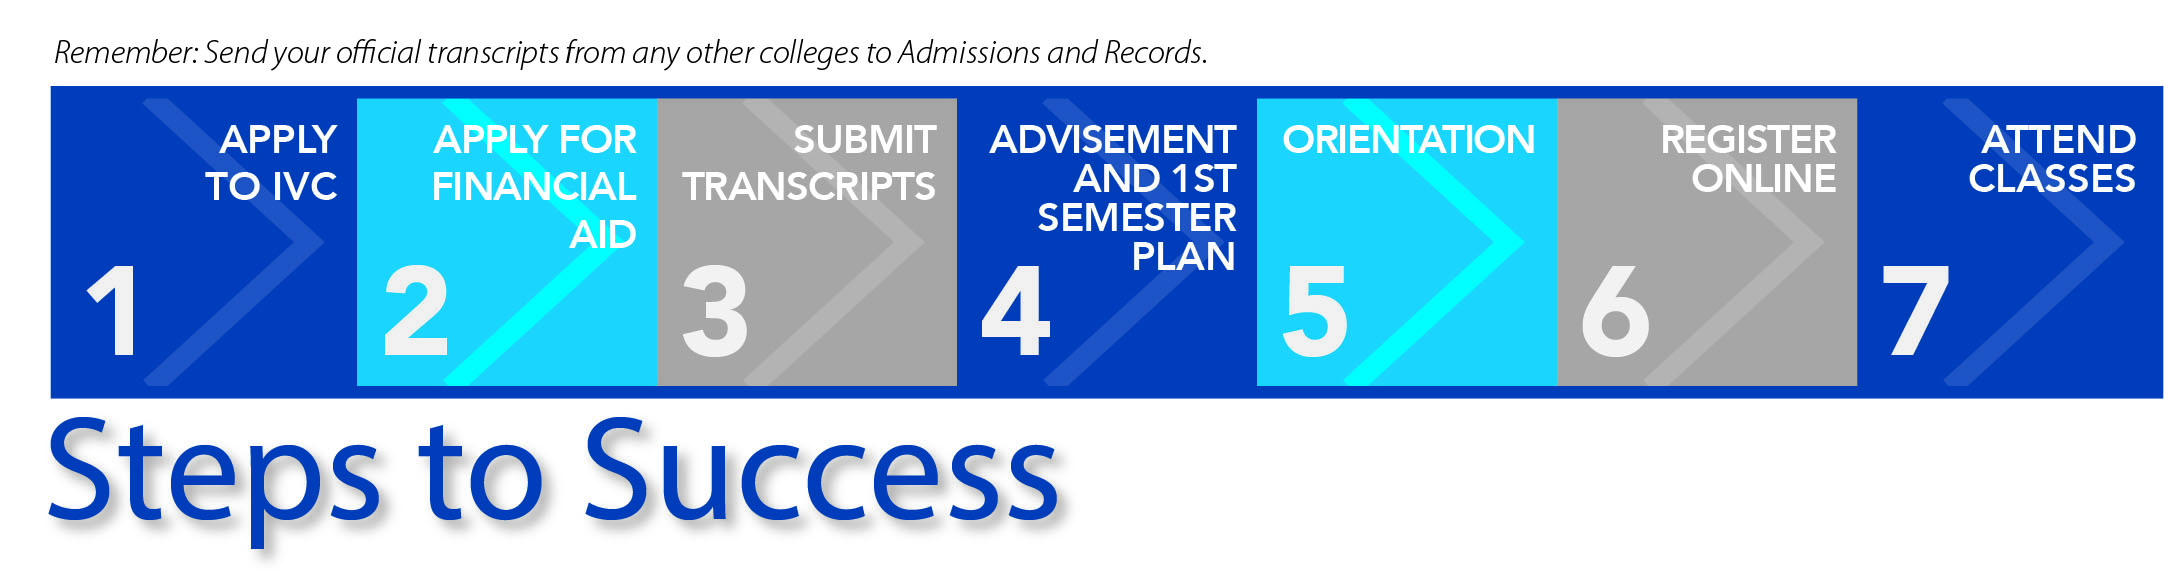 Graphic displaying the following steps to success: Apply to IVC, apply for financial aid, assessment, advisement and first semester plan, orientation, register online, and attend classes. Remember to send your official transcripts from any other colleges to Admissions and Records.